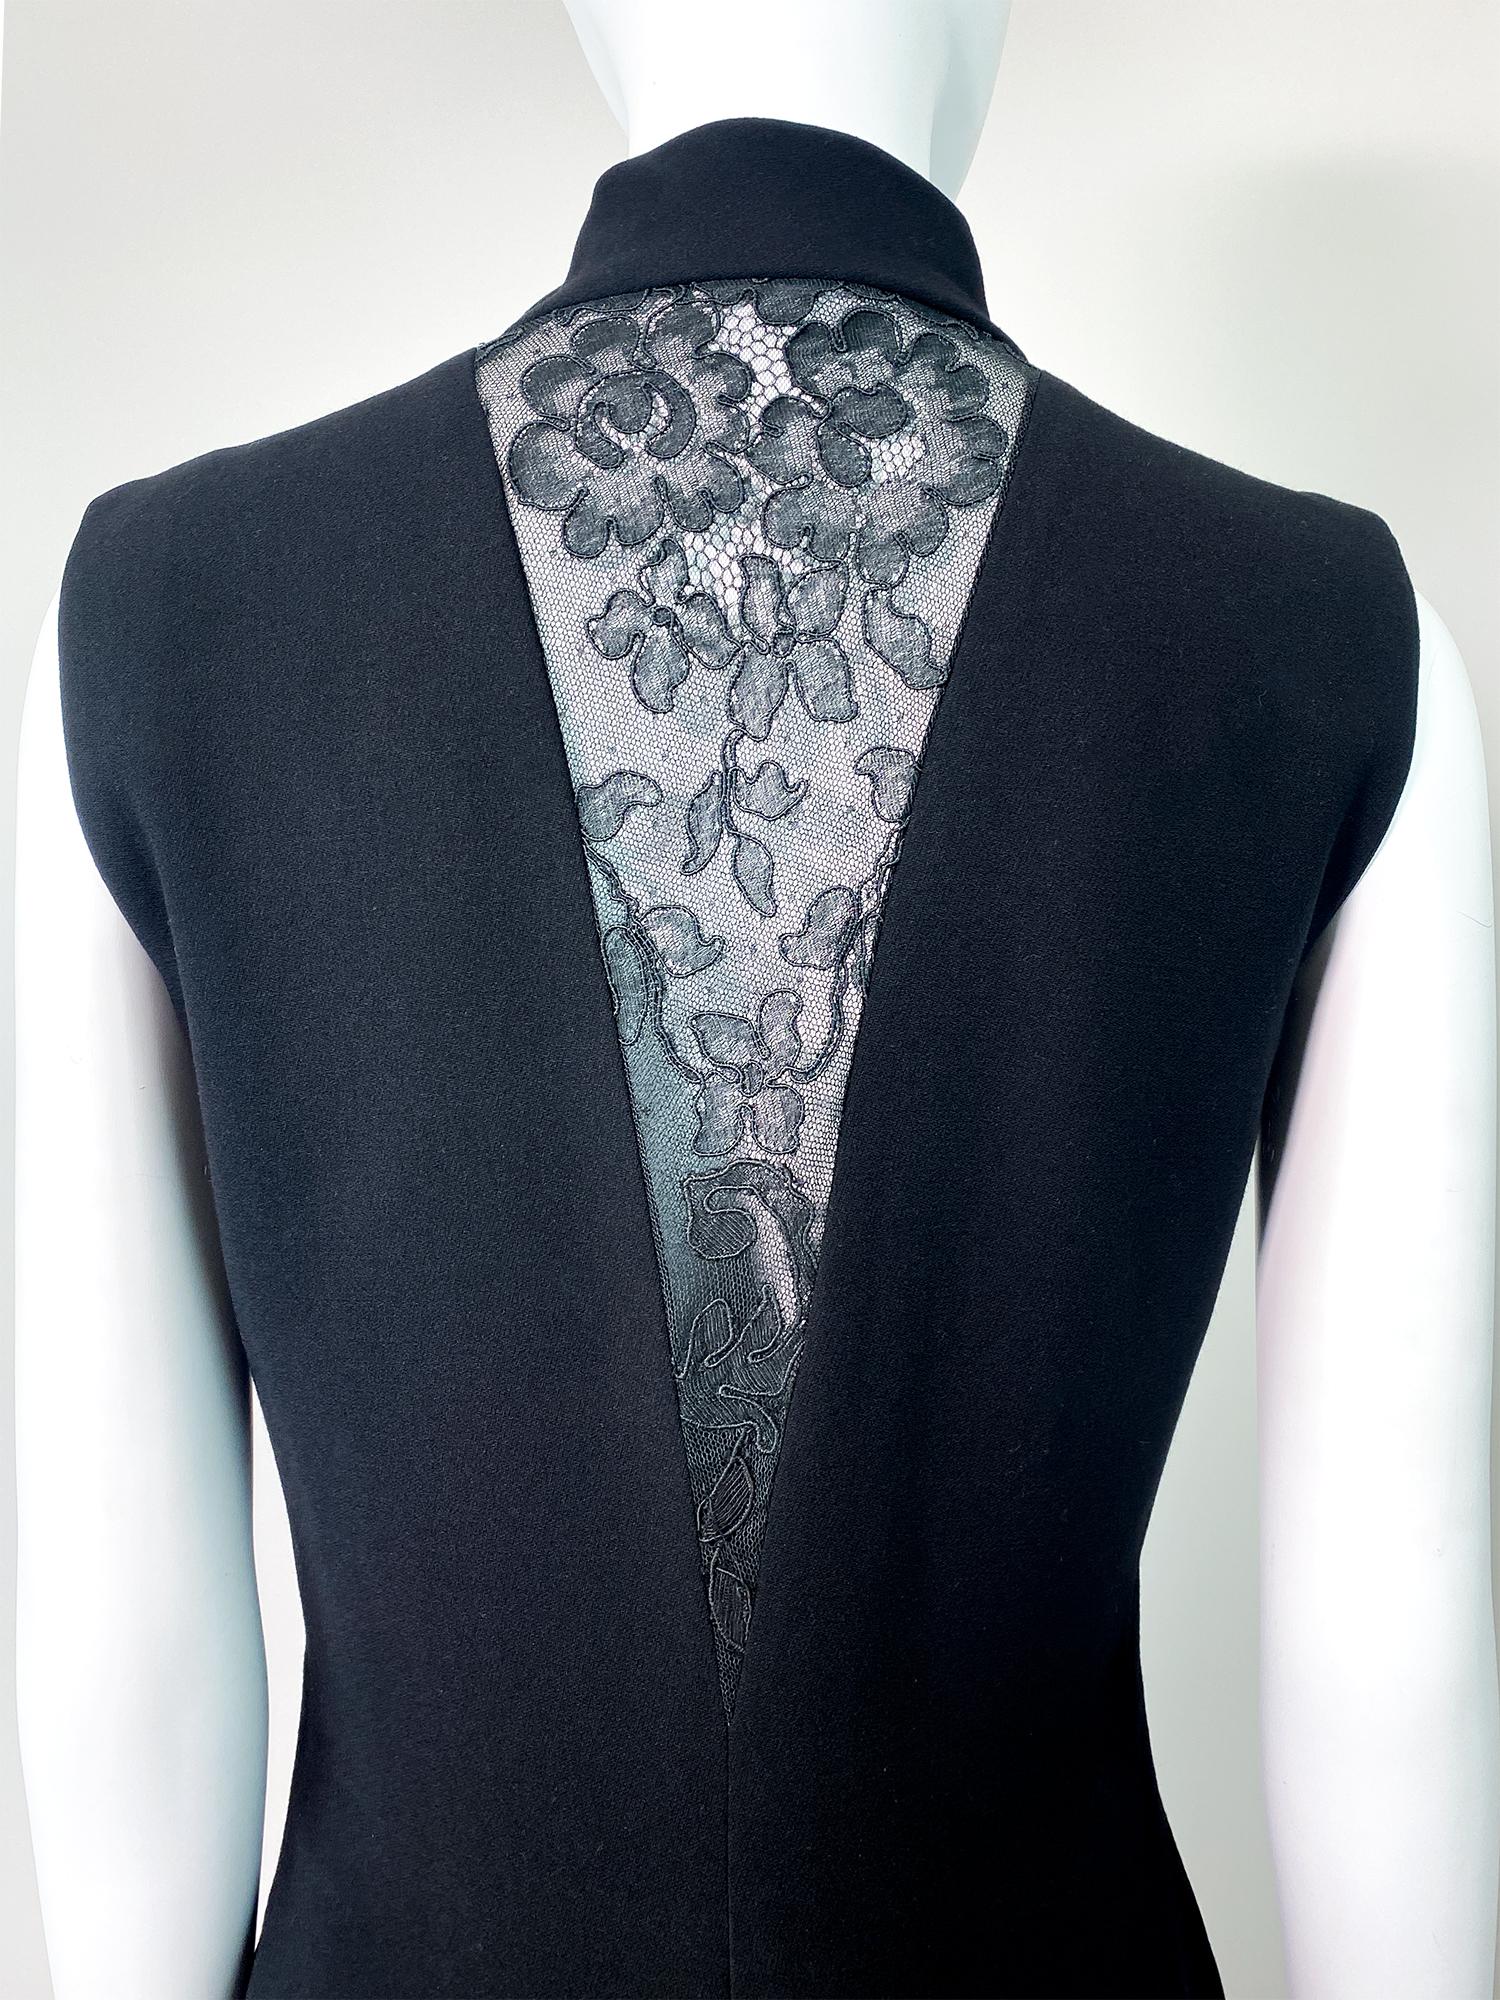 VERSACE F/W 1993 Vintage Lace Detail Black Dress by Gianni Versace For Sale 1